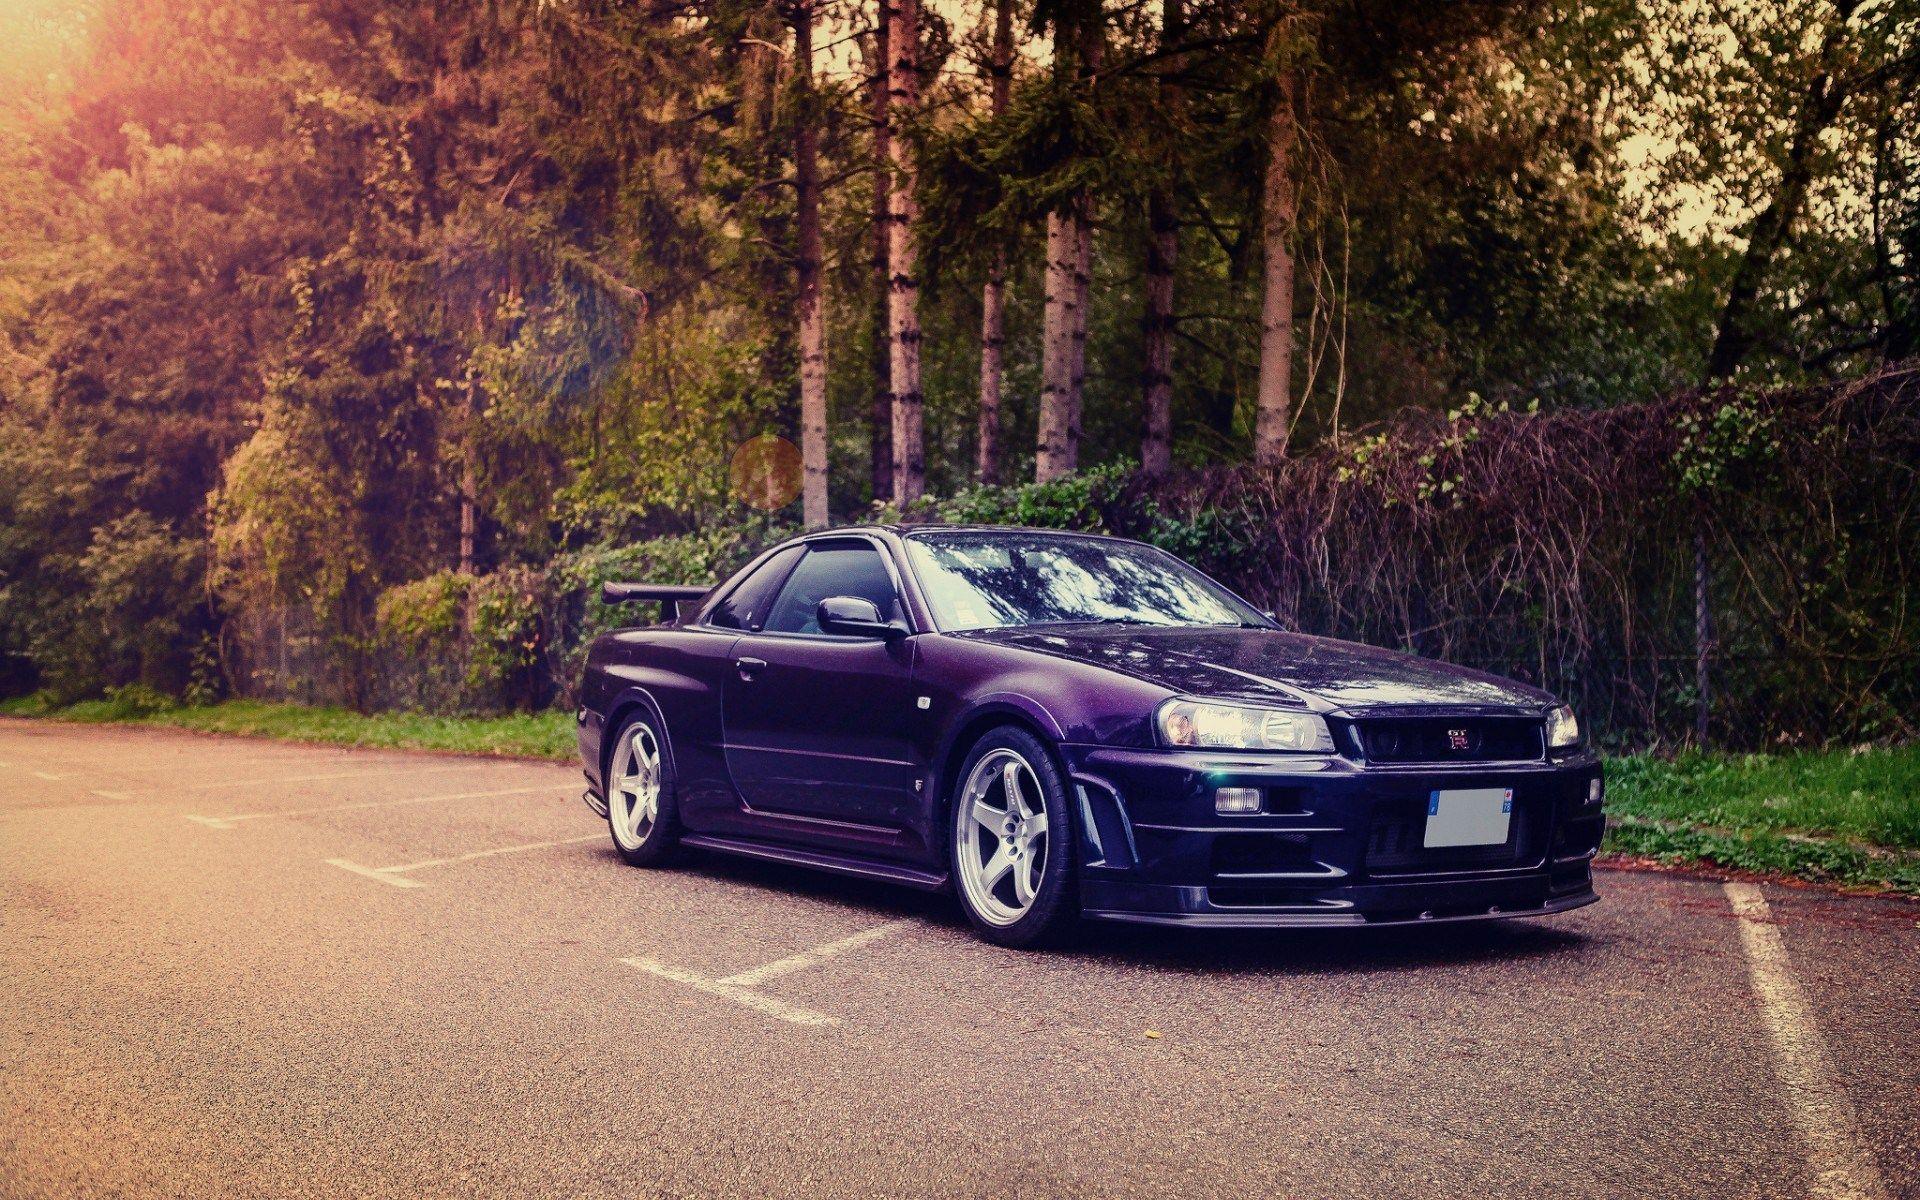 Nissan Skyline GT R R34 Forest Trees Parking Lot HD Wallpapers